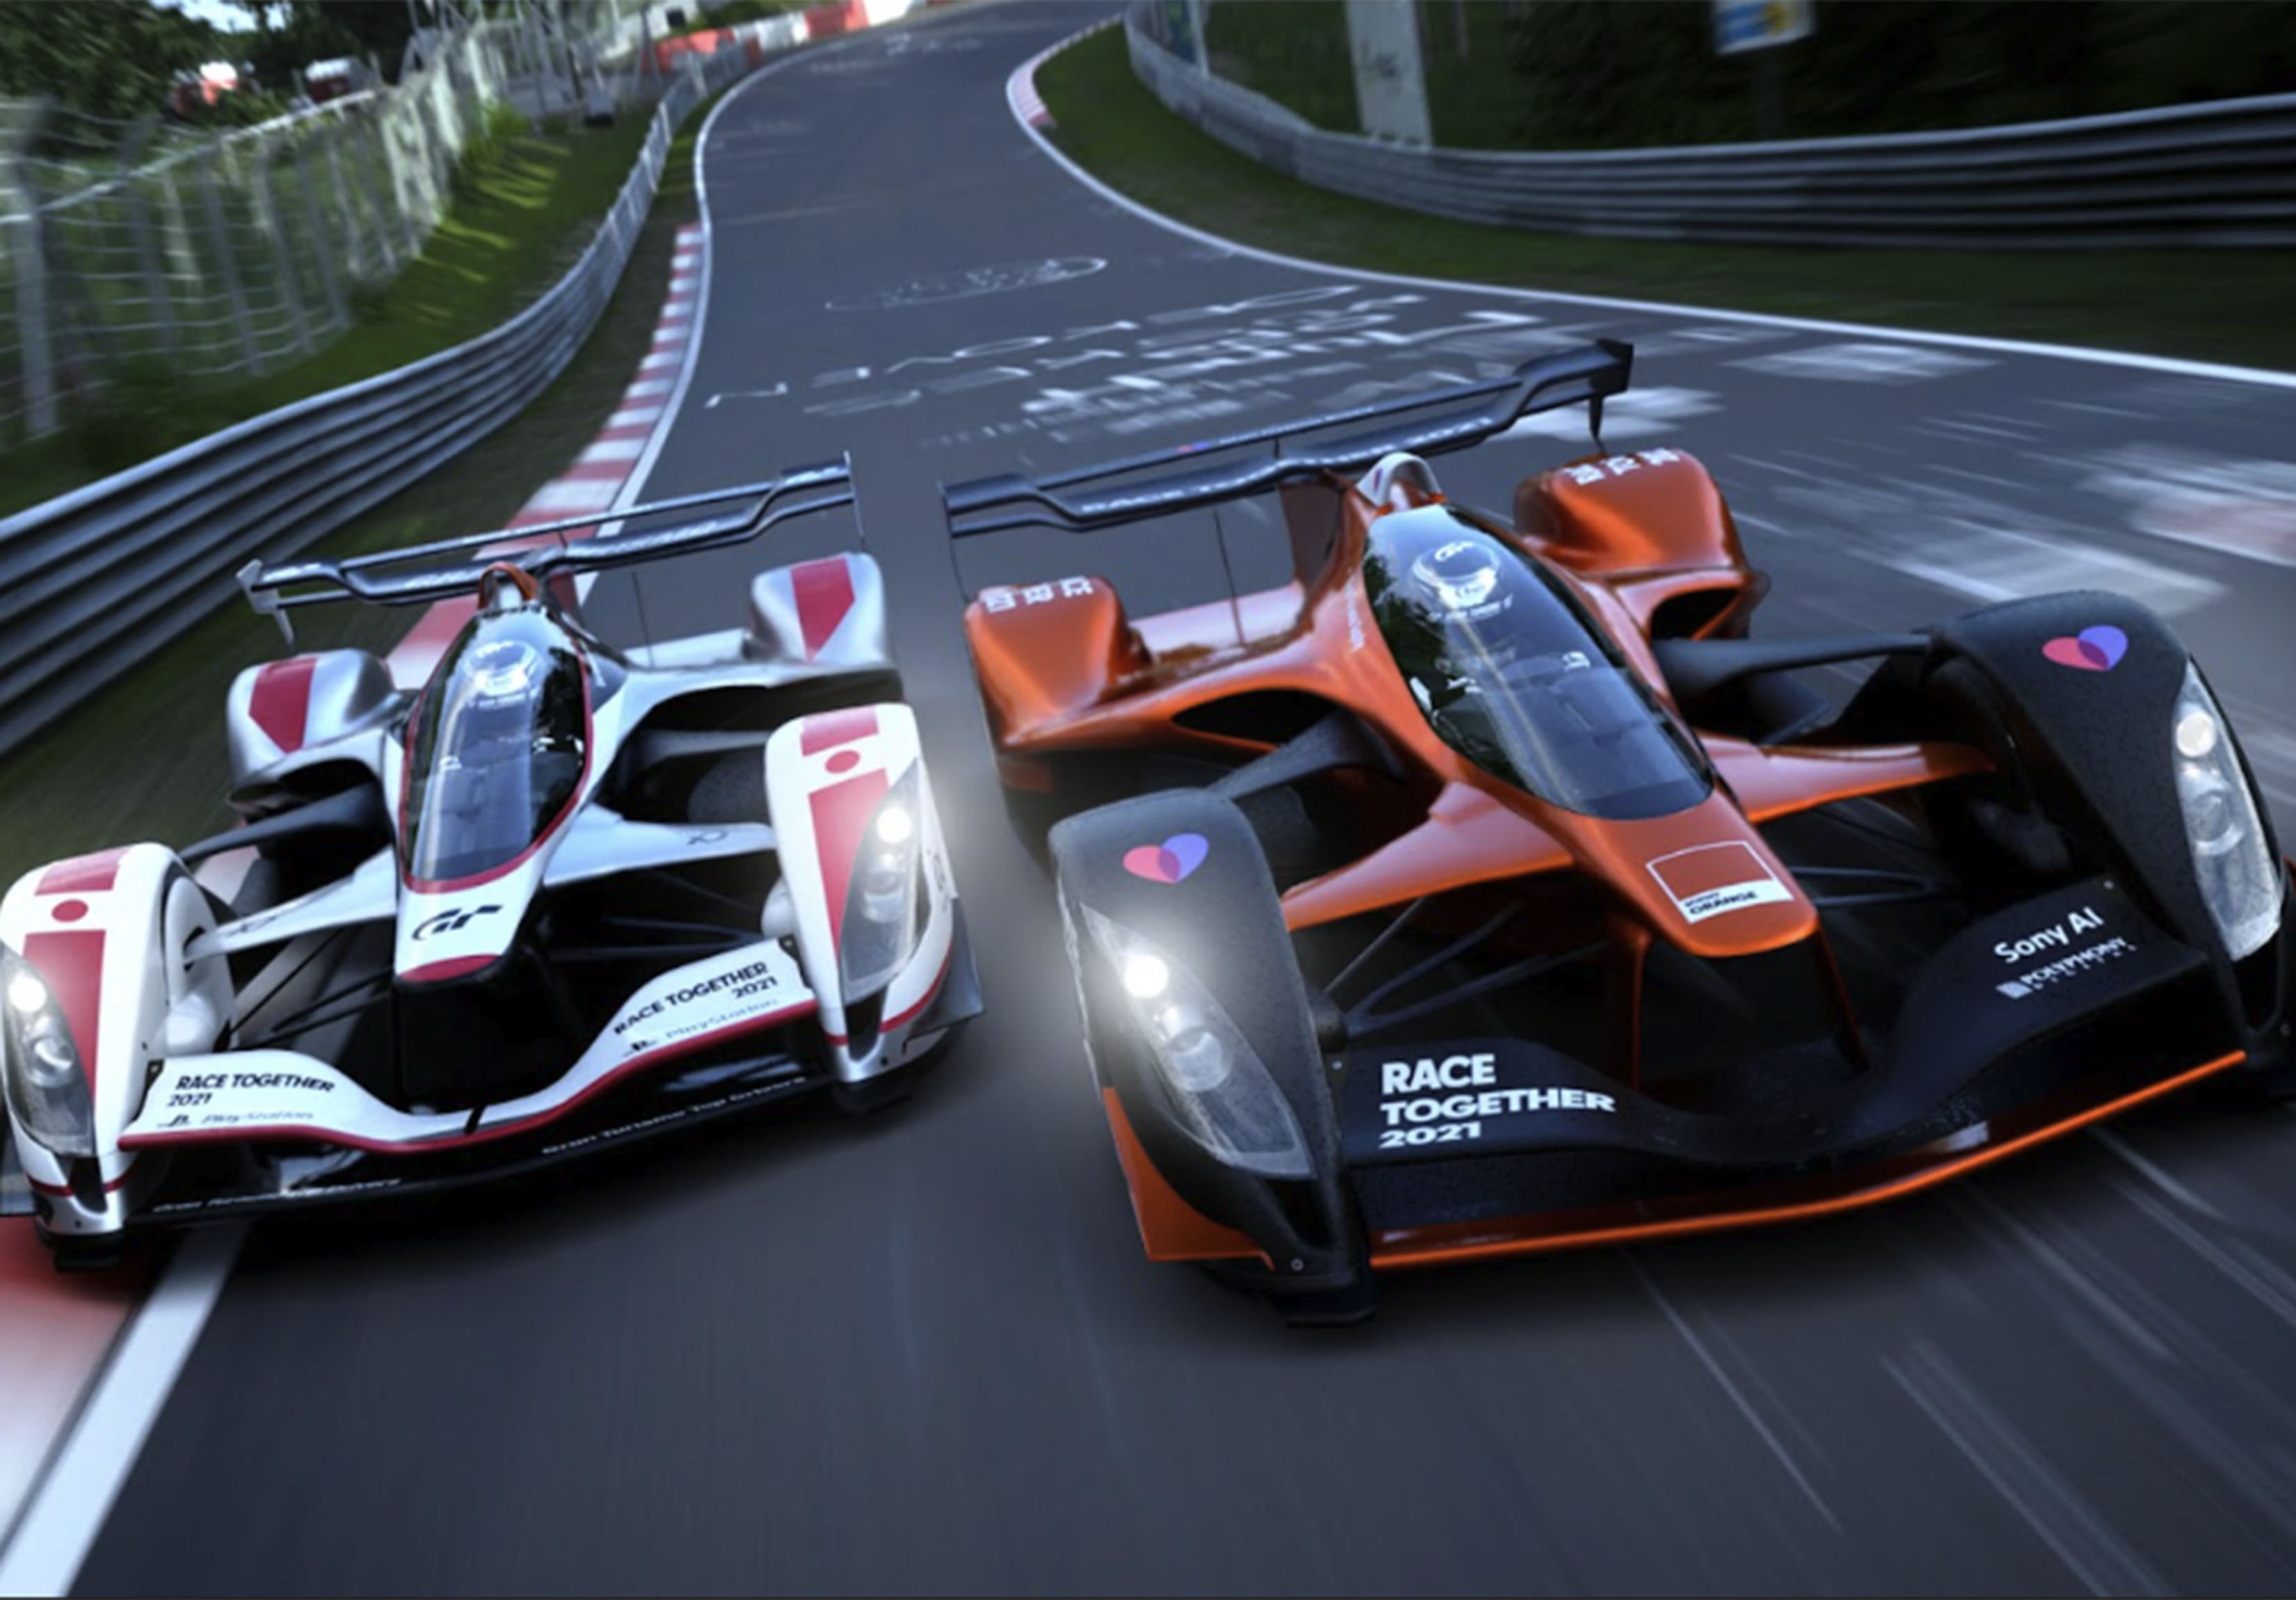 Game image of two racecars side by side. They are seen from the front with track behind them.